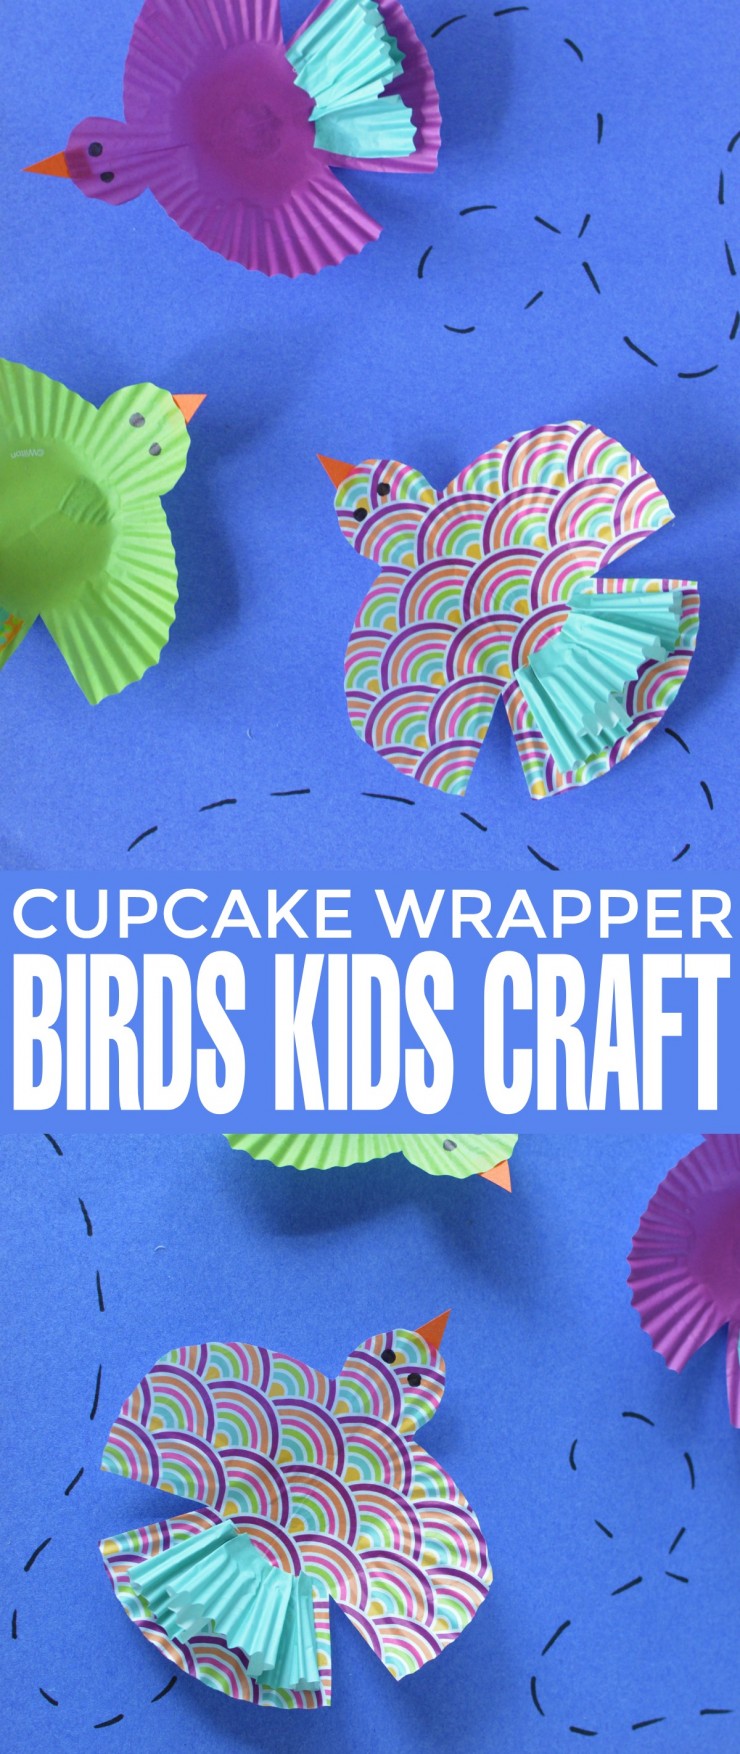 This delightful bird kids craft makes use of vibrant and fun craft materials to create a cupcake liner craft that kids will love.  